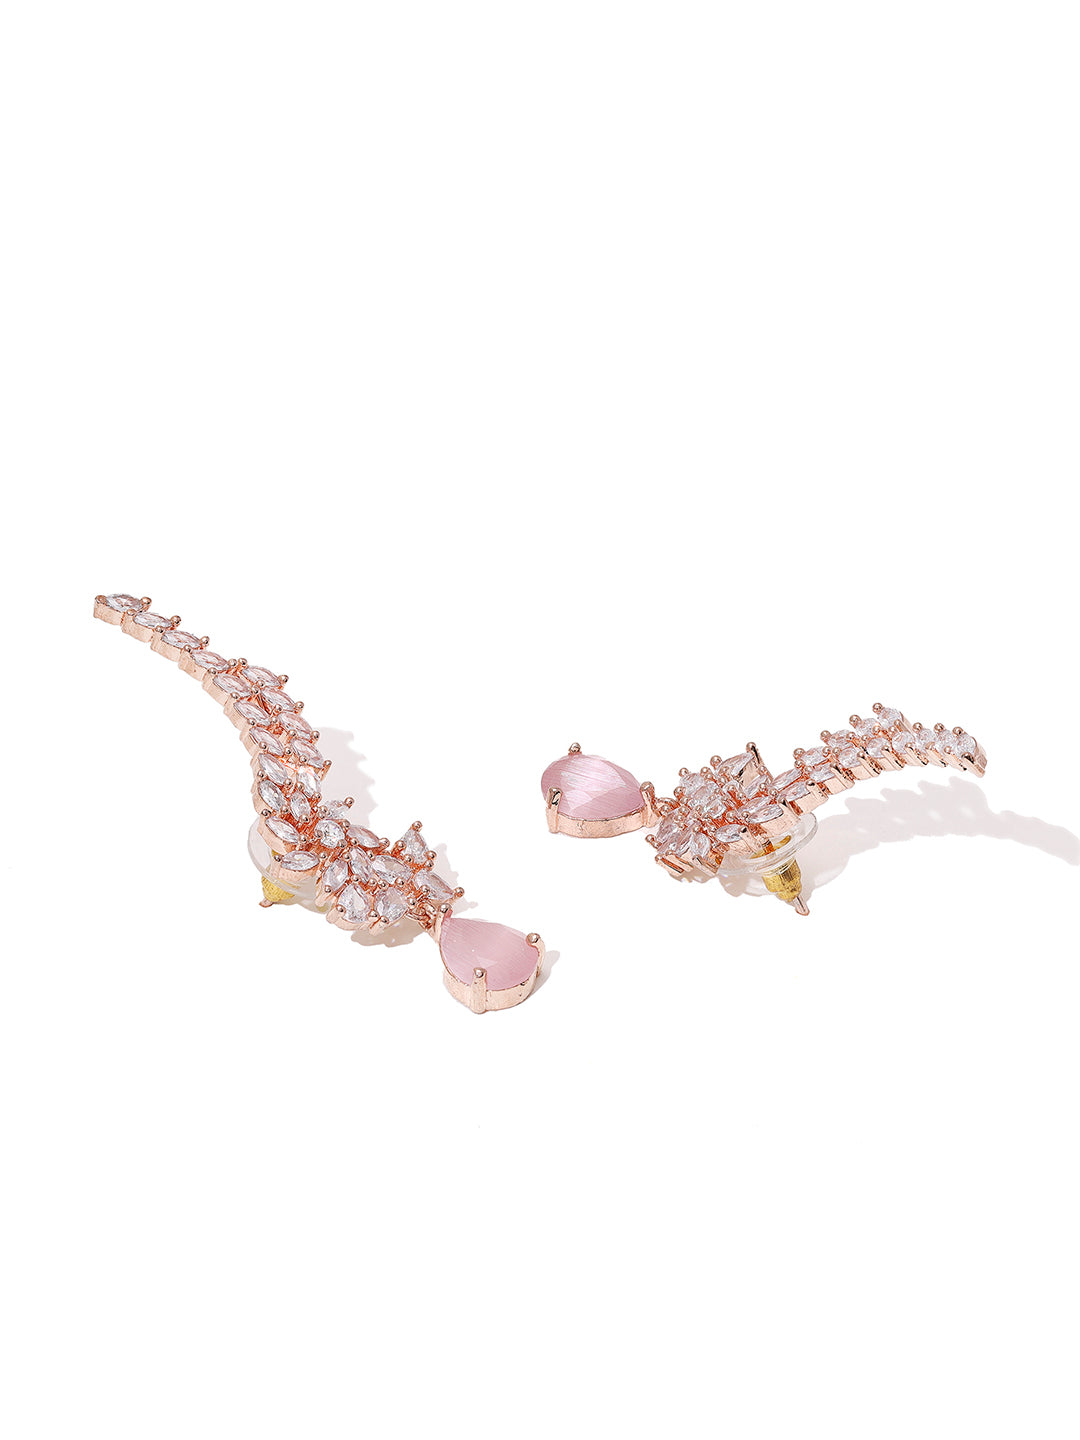 Priyaasi Rose Gold-Plated Brilliance with American Diamond and Blush Pink Stones Bracelet